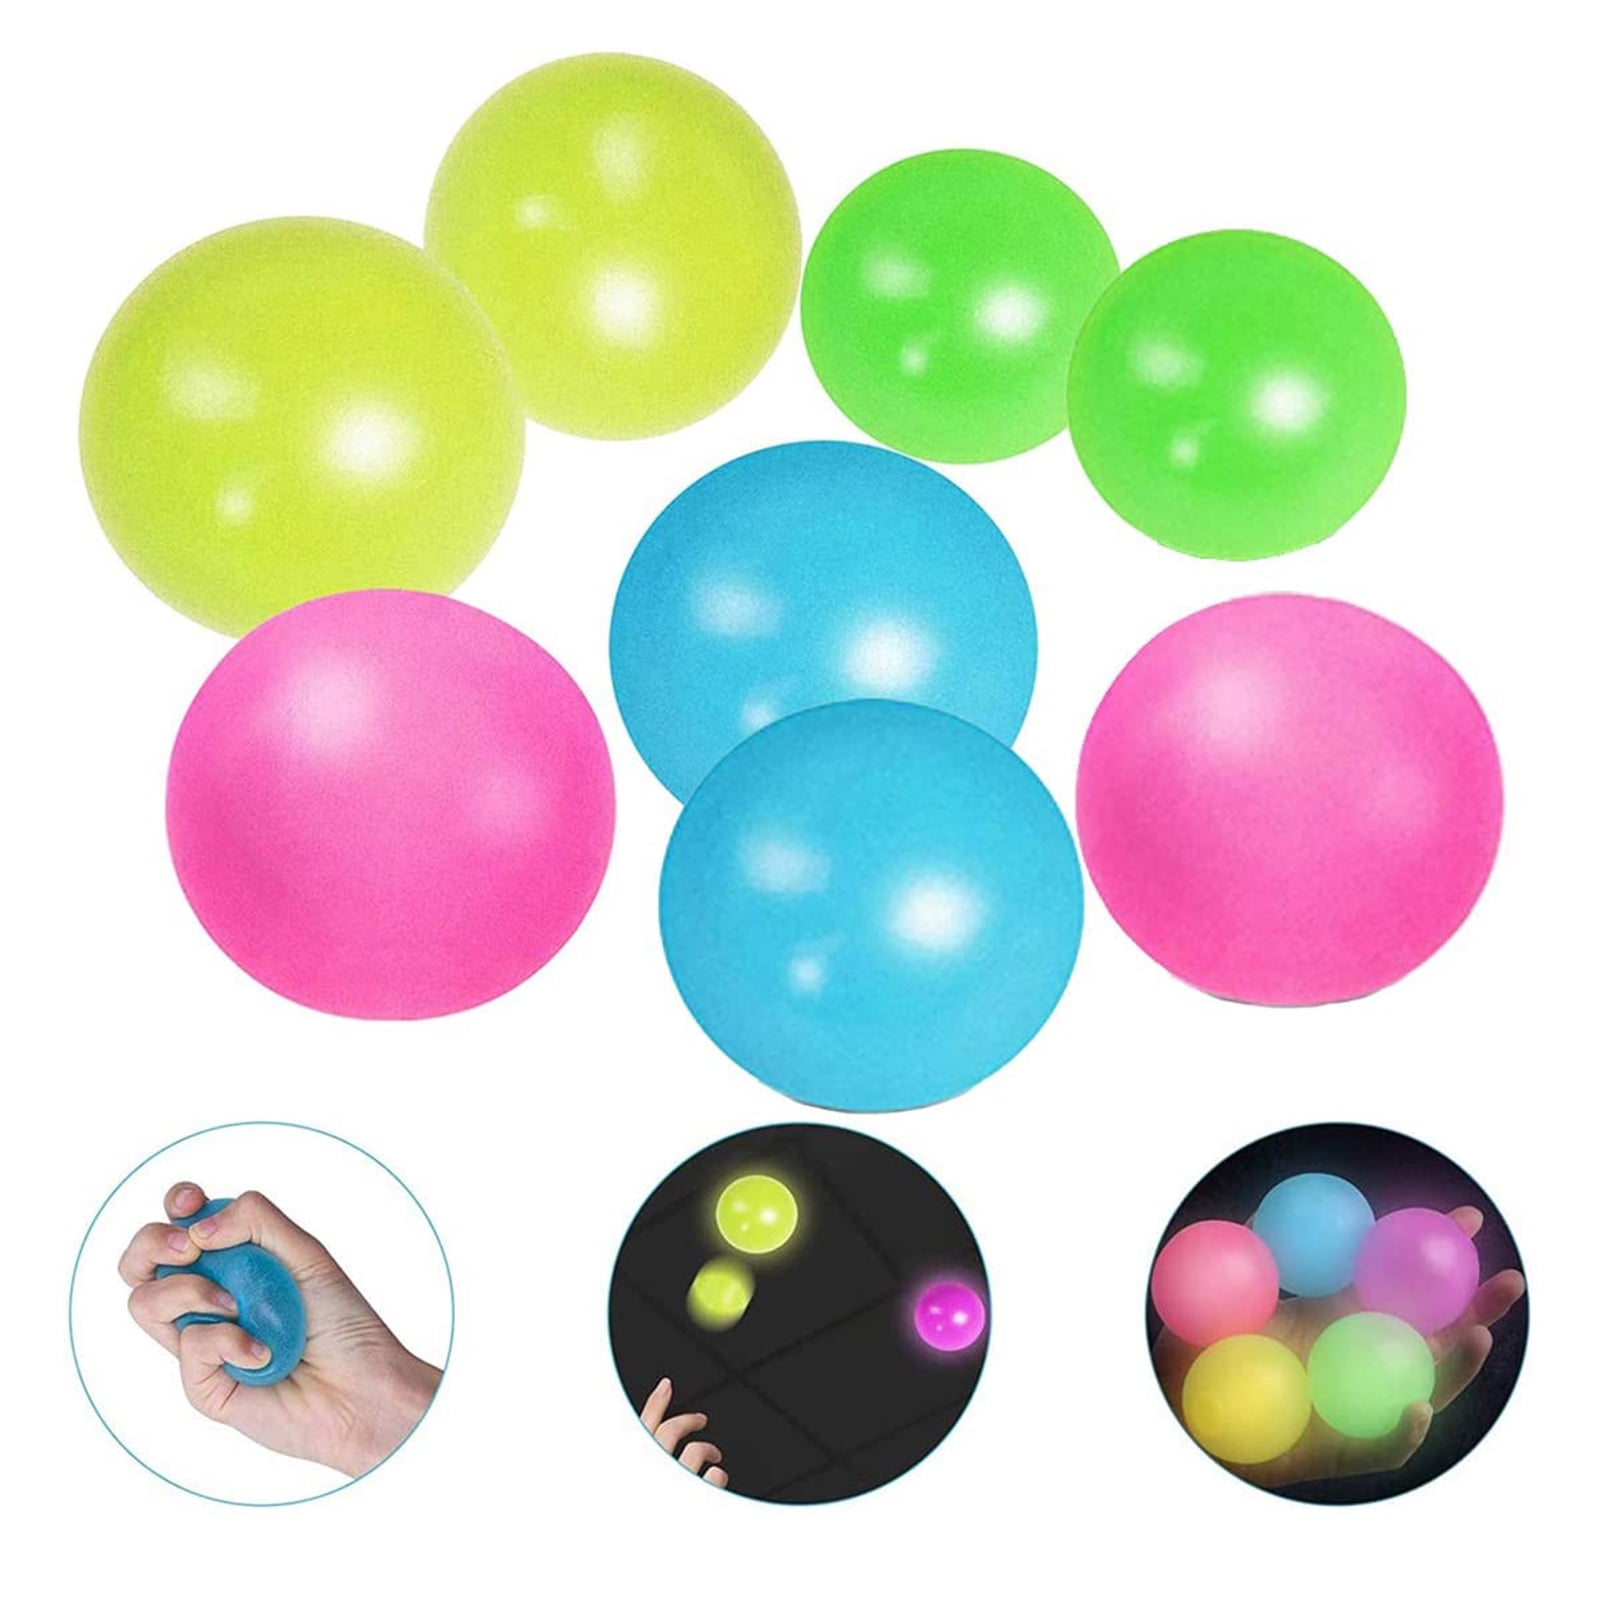 Details about   4Pc Fluorescent Sticky Wall Balls Sticky Ball Ceiling Relief Globbles Stress Toy 